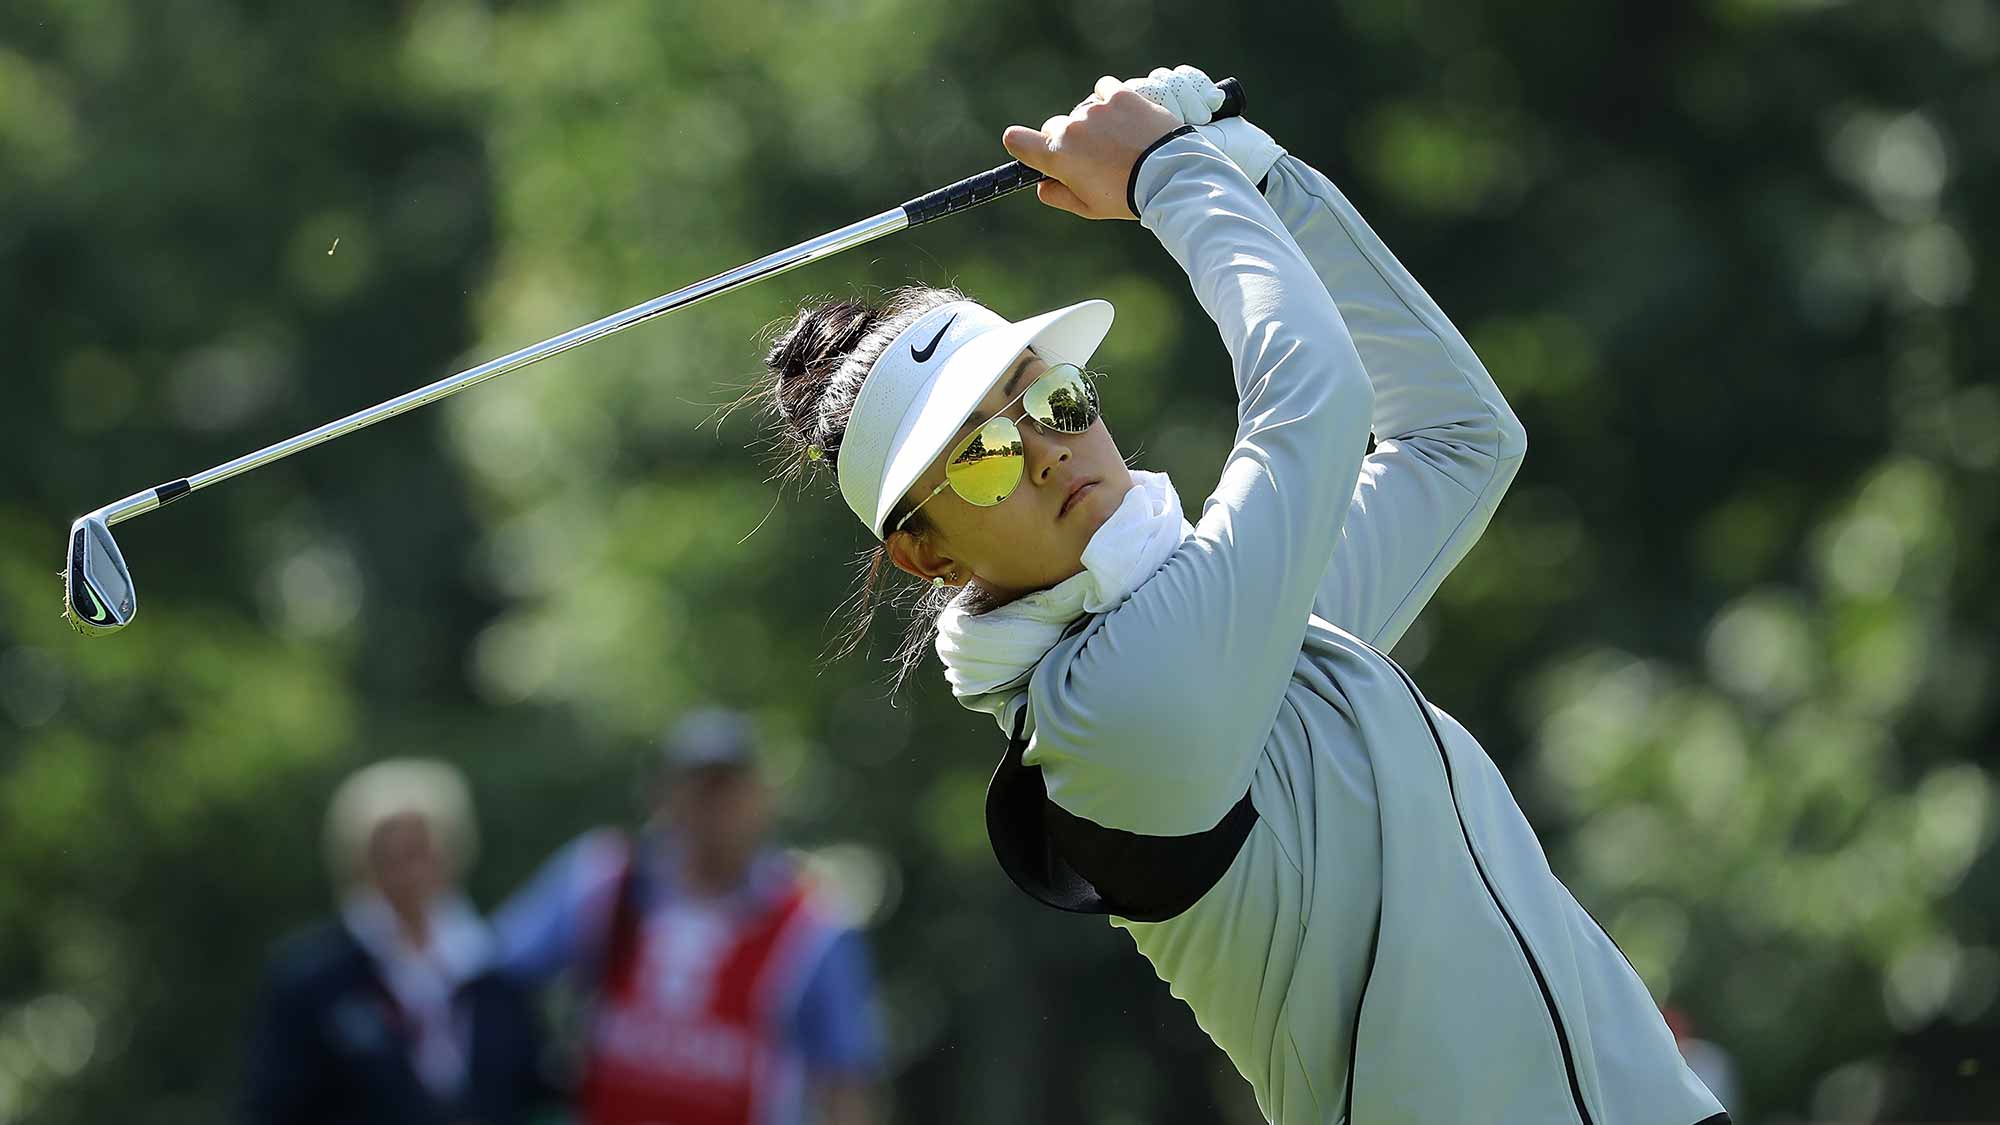 Michelle Wie of the United States hits an approach shot during a Pro-Am round ahead of the Ricoh Women's British Open